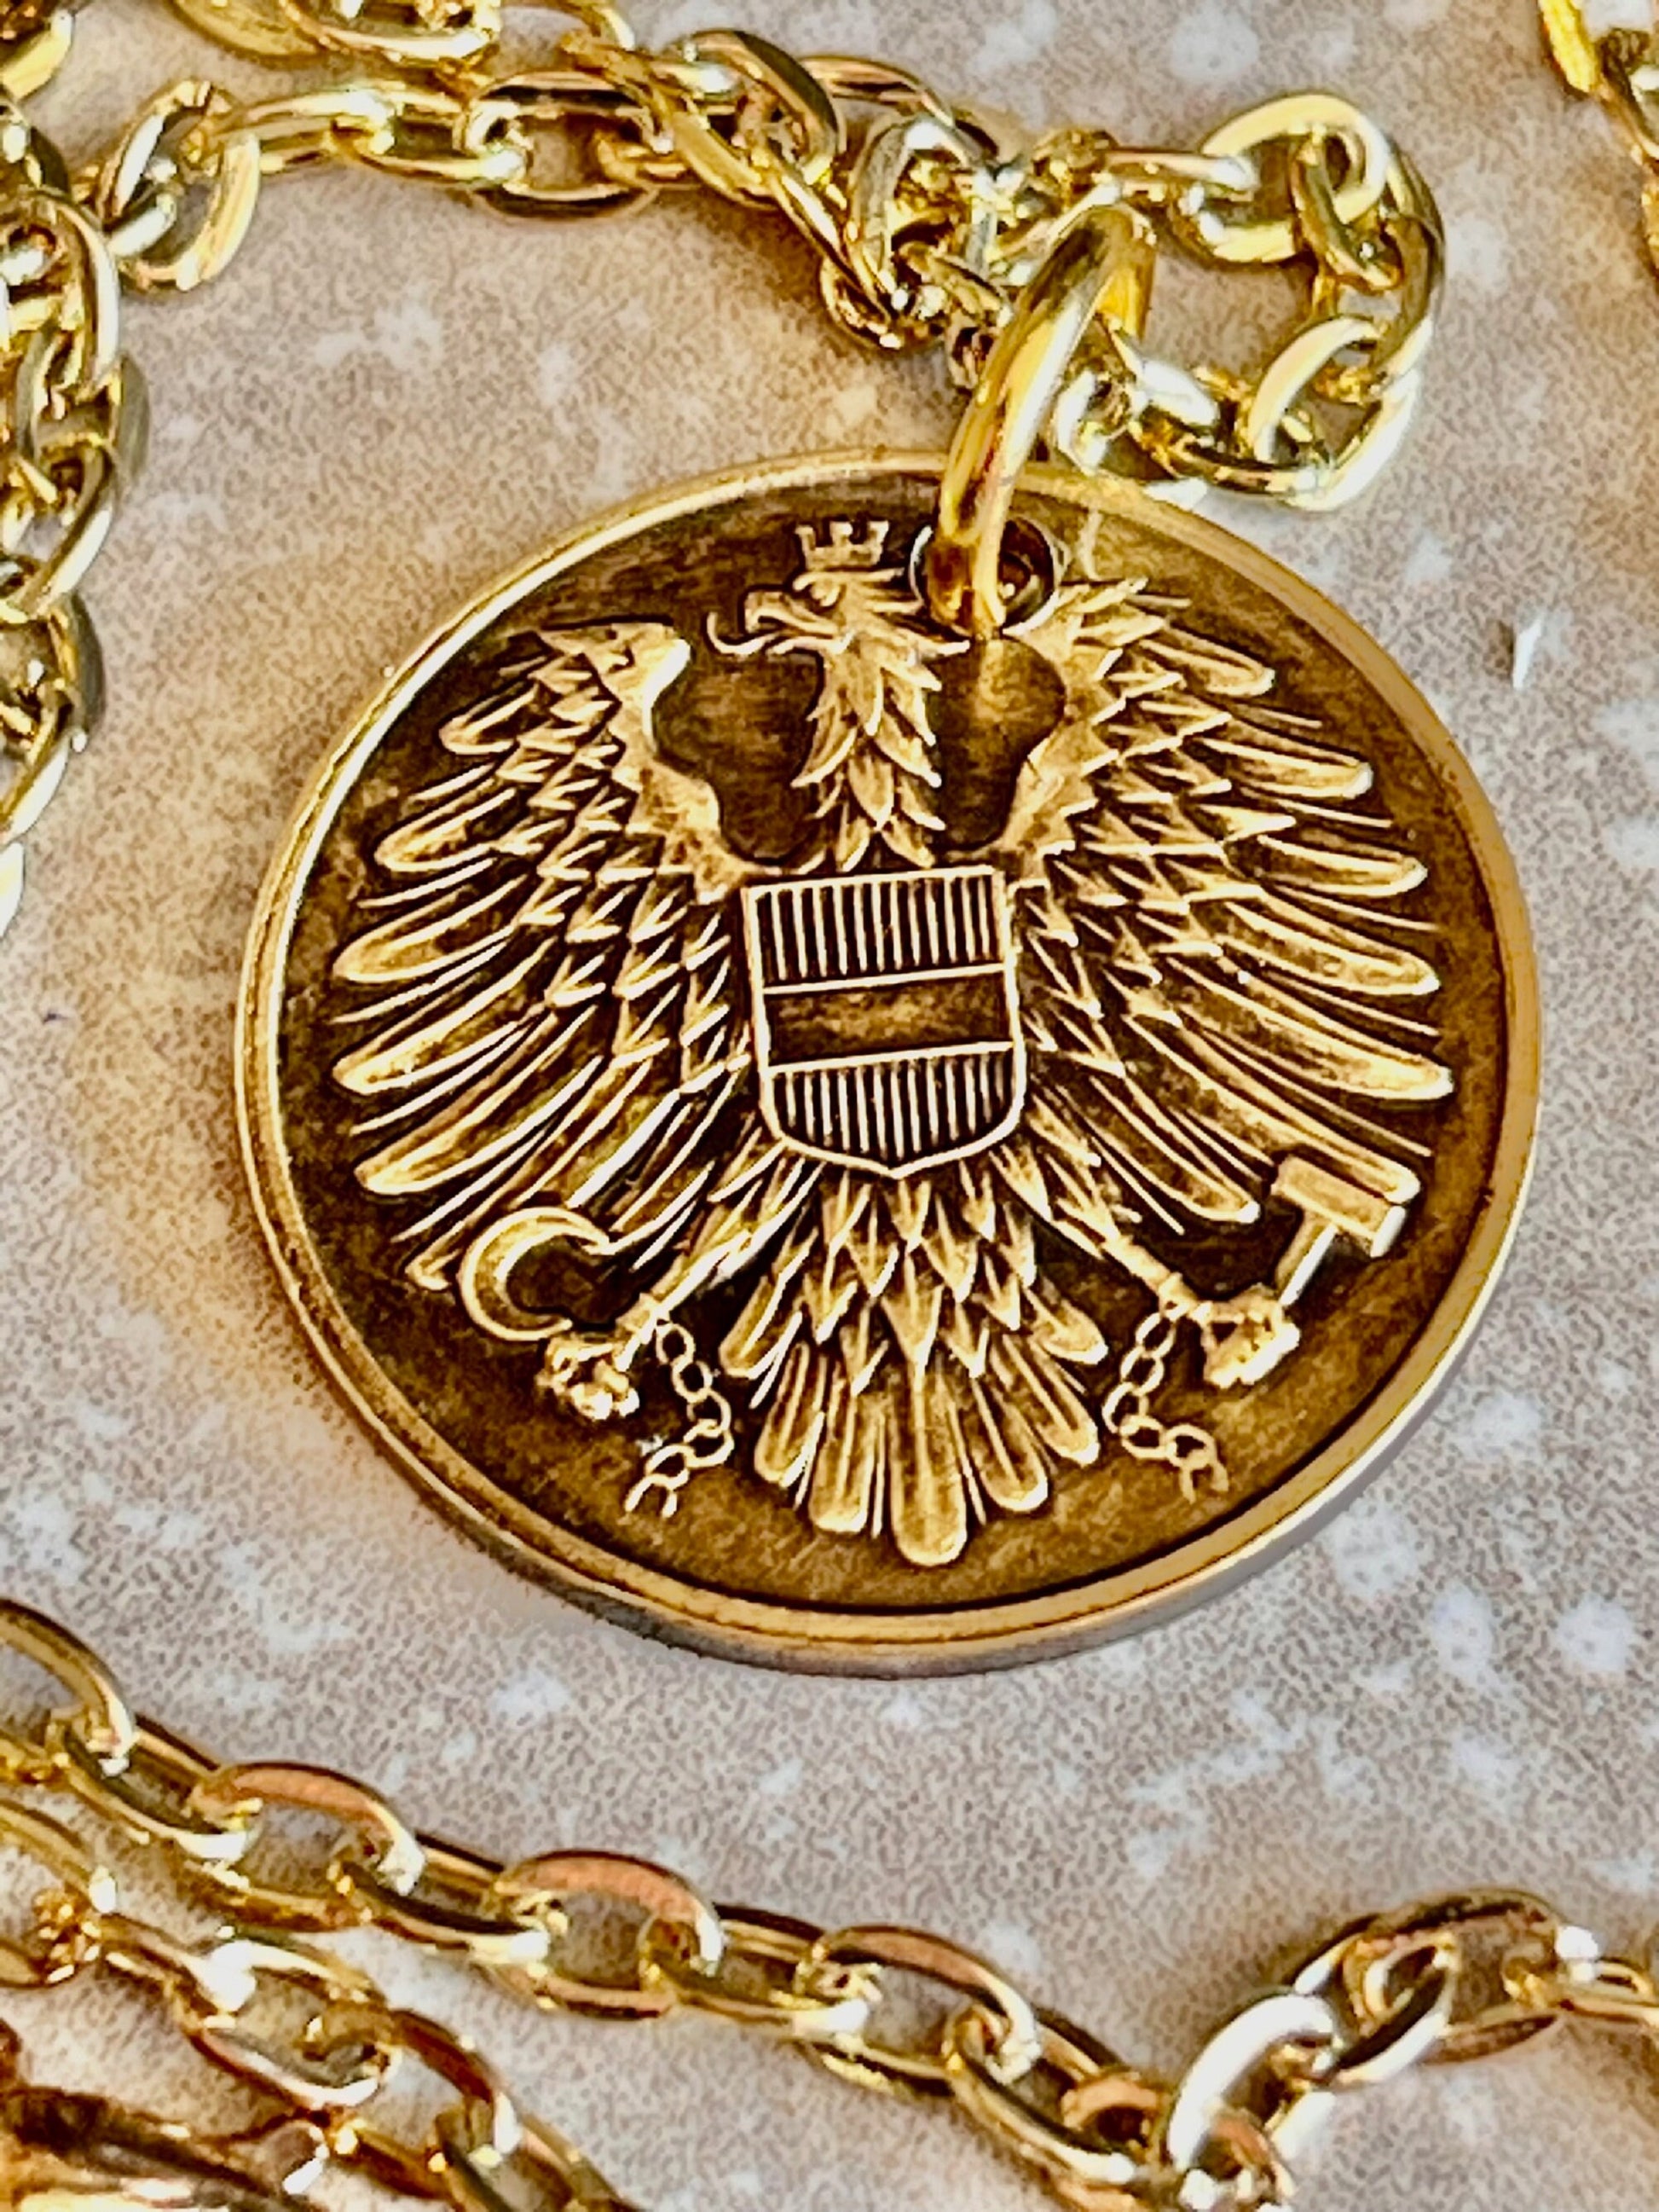 Austria Republic Österreich Austrian 20 Personal Necklace Old Vintage Handmade Jewelry Gift Friend Charm For Him Her World Coin Collector